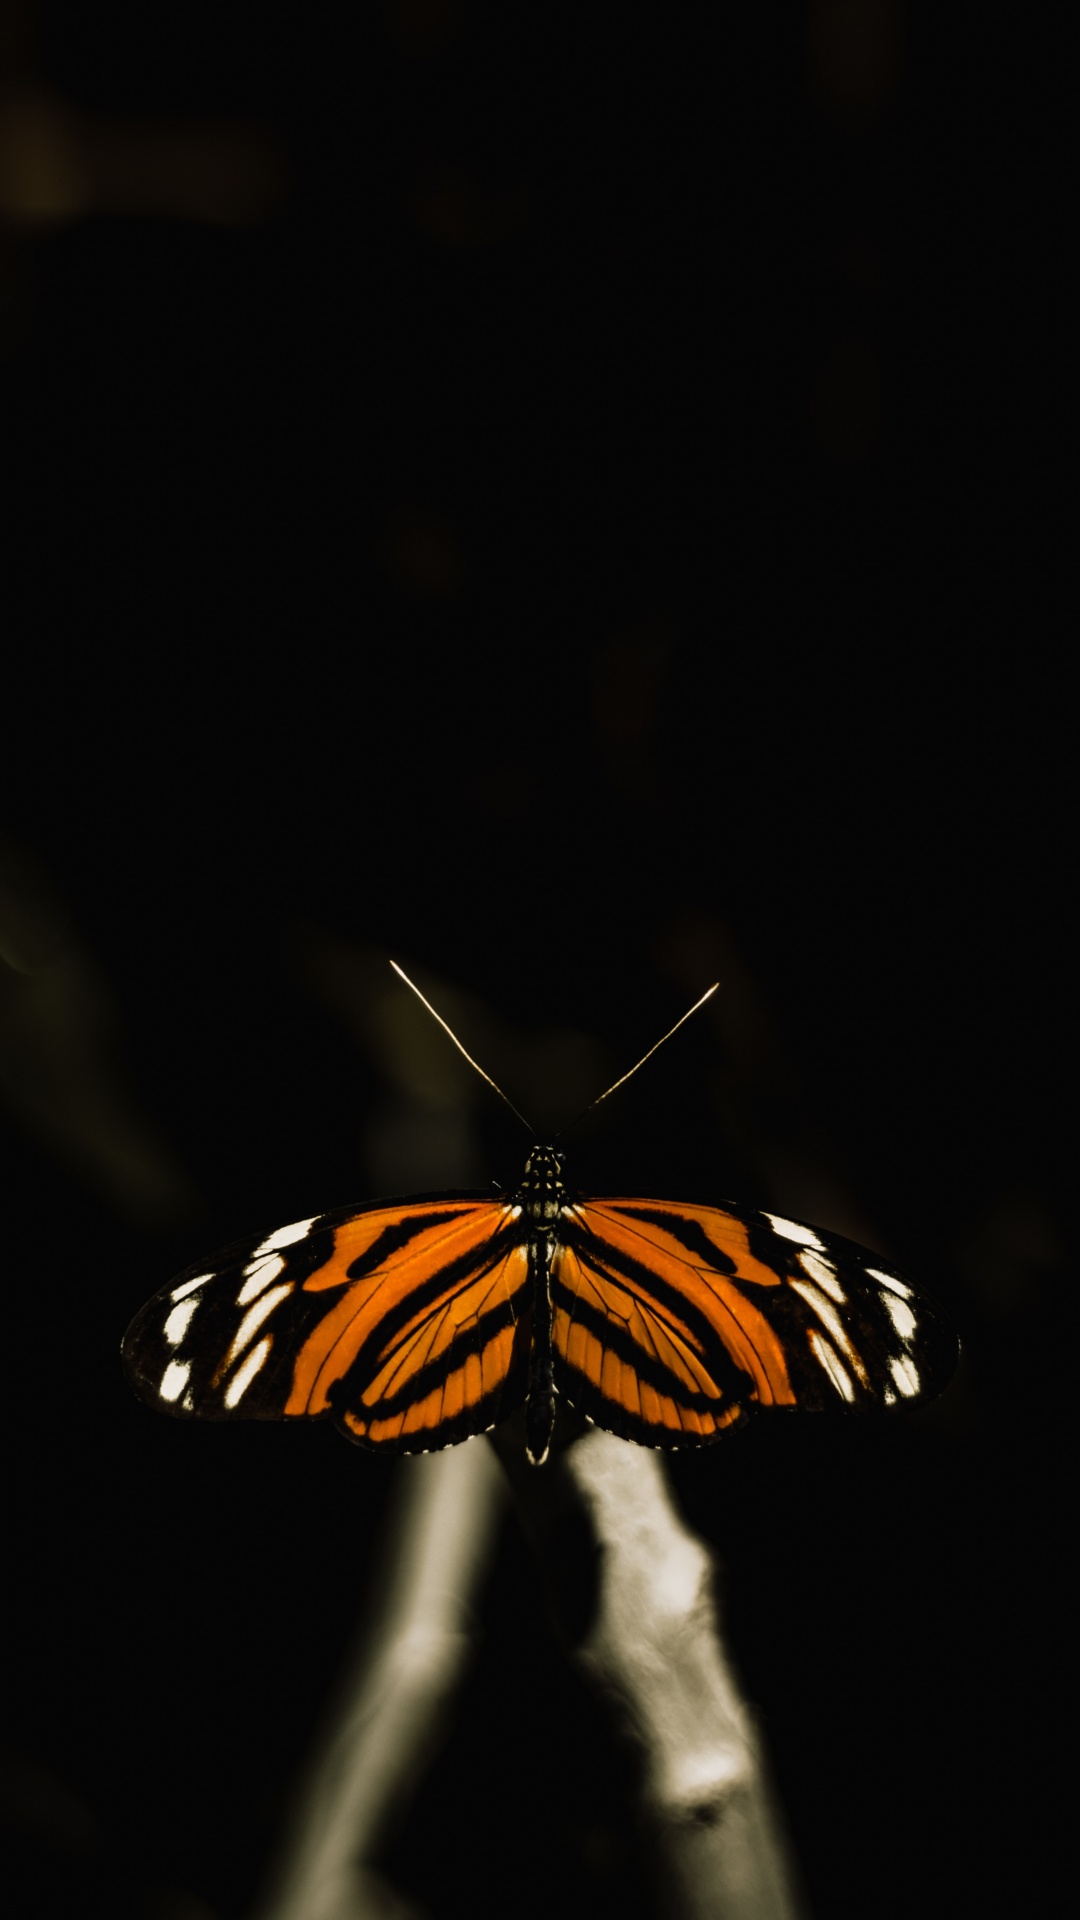 Black and White Butterfly on Black Background. Wallpaper in 1080x1920 Resolution